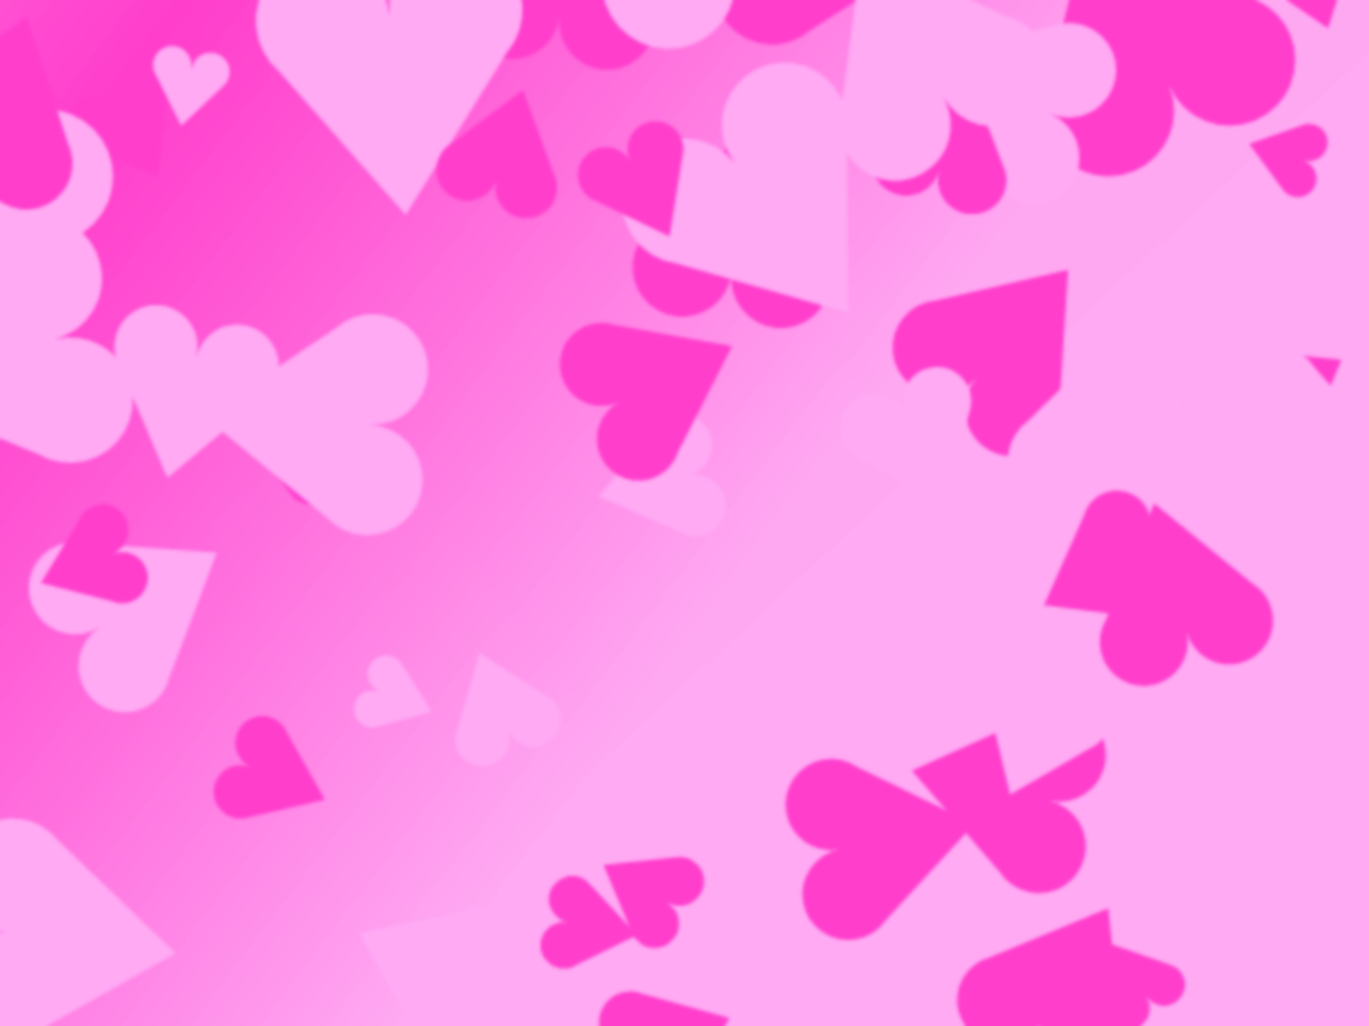 Pink Love Heart Backgrounds - Pink Love Hearts Background - HD Wallpaper 